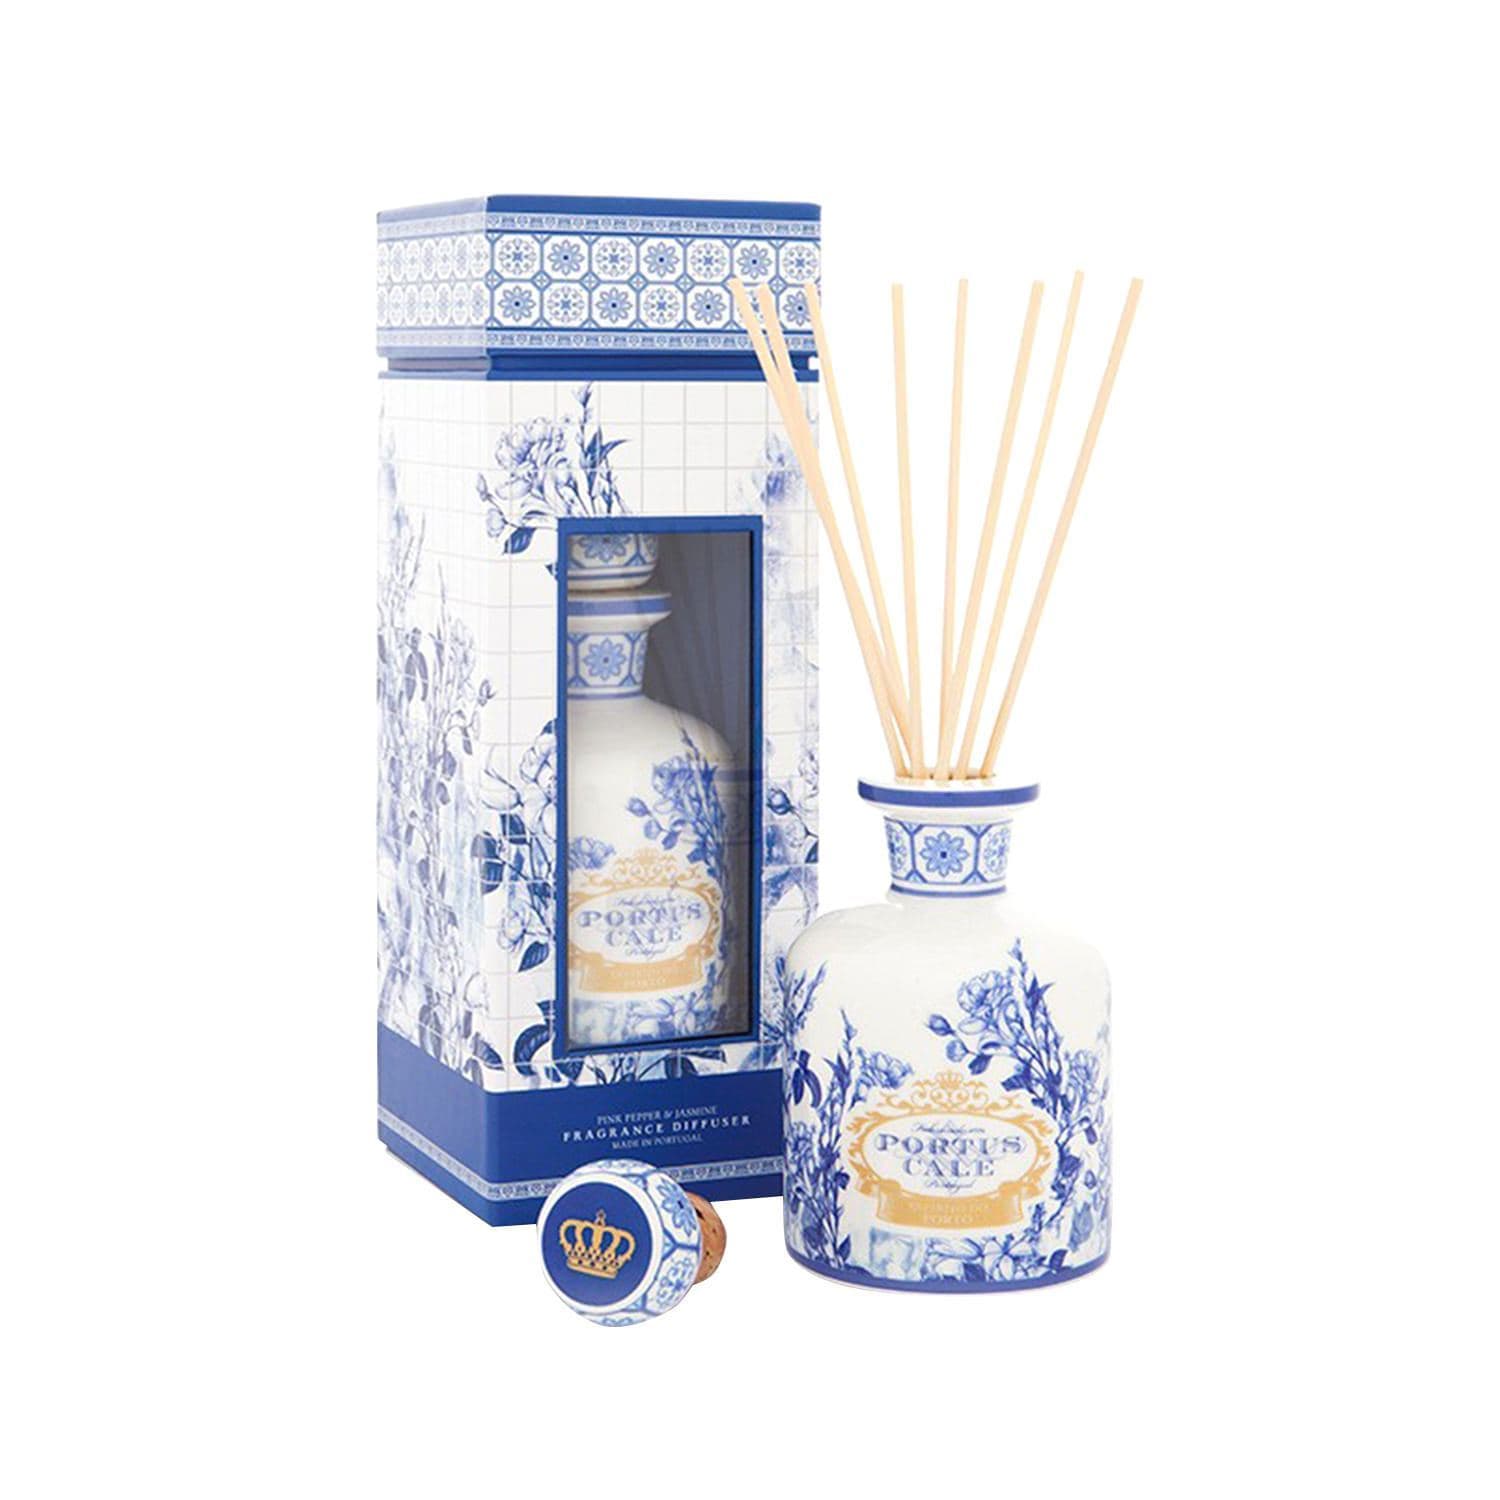 Castelbel Portus Cale Blue and Gold Reed Diffuser - 250ml - C2-2304 - Jashanmal Home